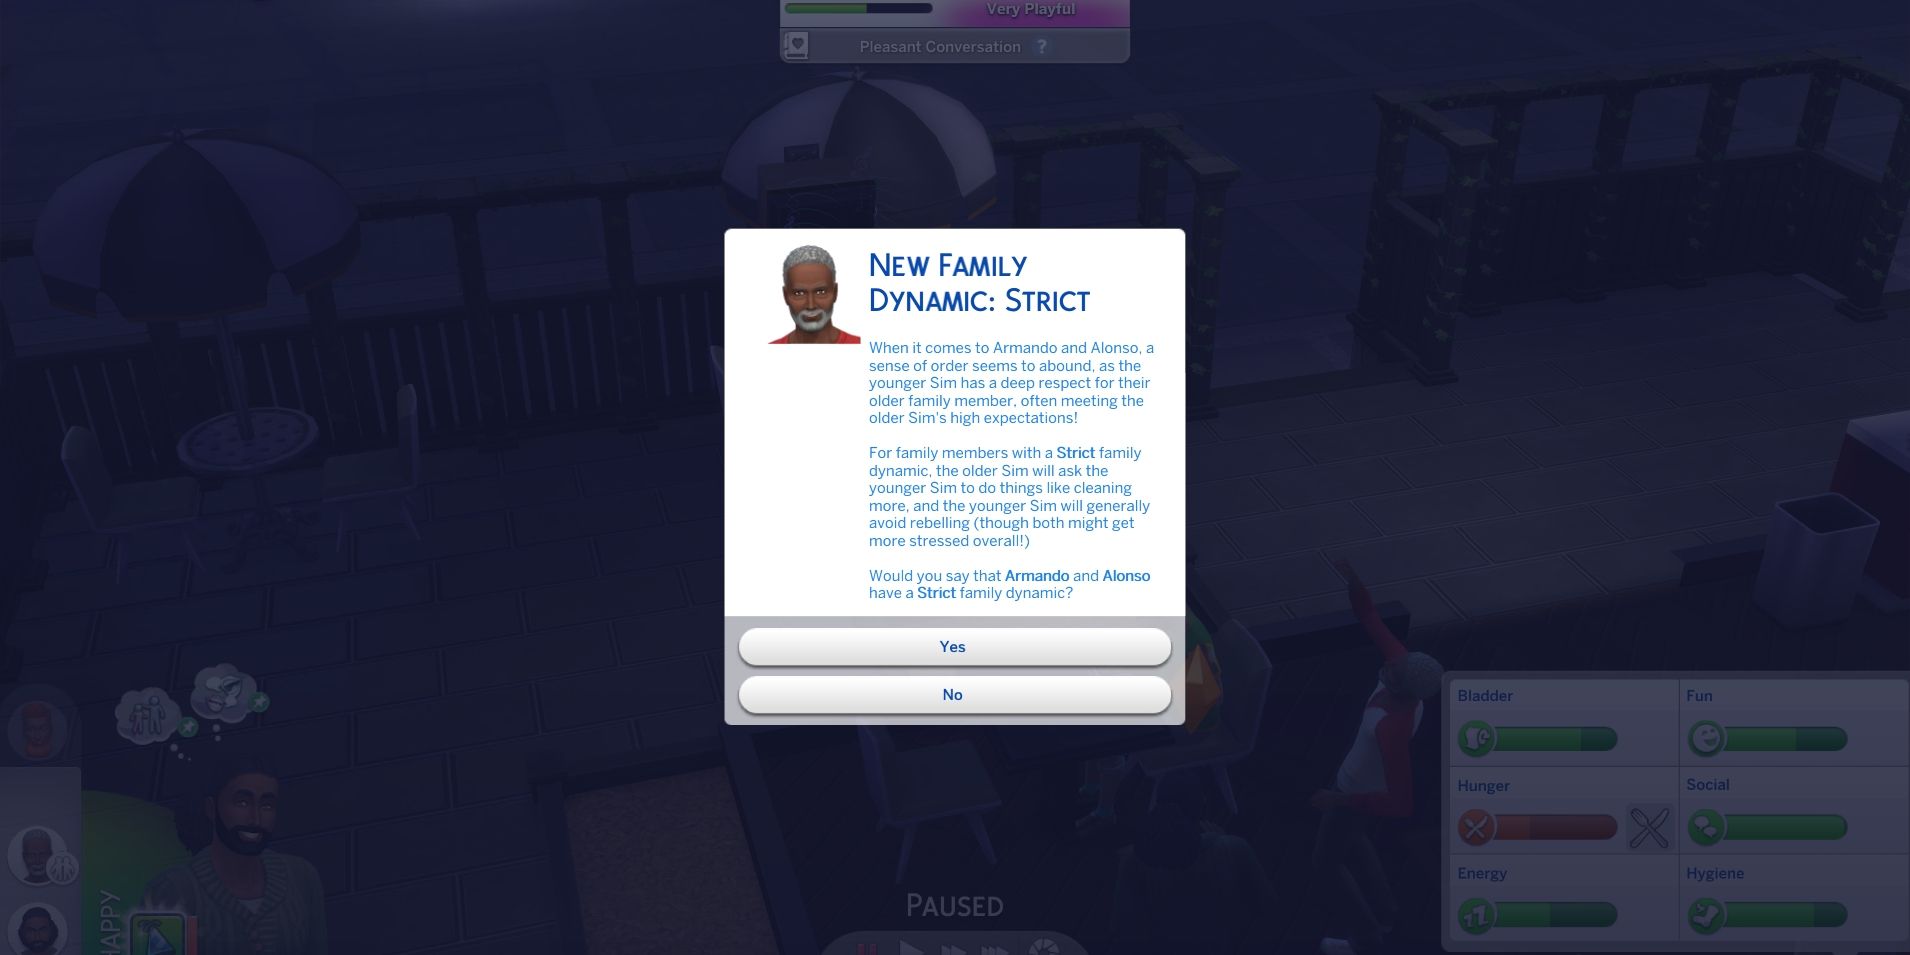 A pop-up in The Sims 4 indicates that there is now a new relationship between Alonso and his father, Armando;  Armando is now a strict father.